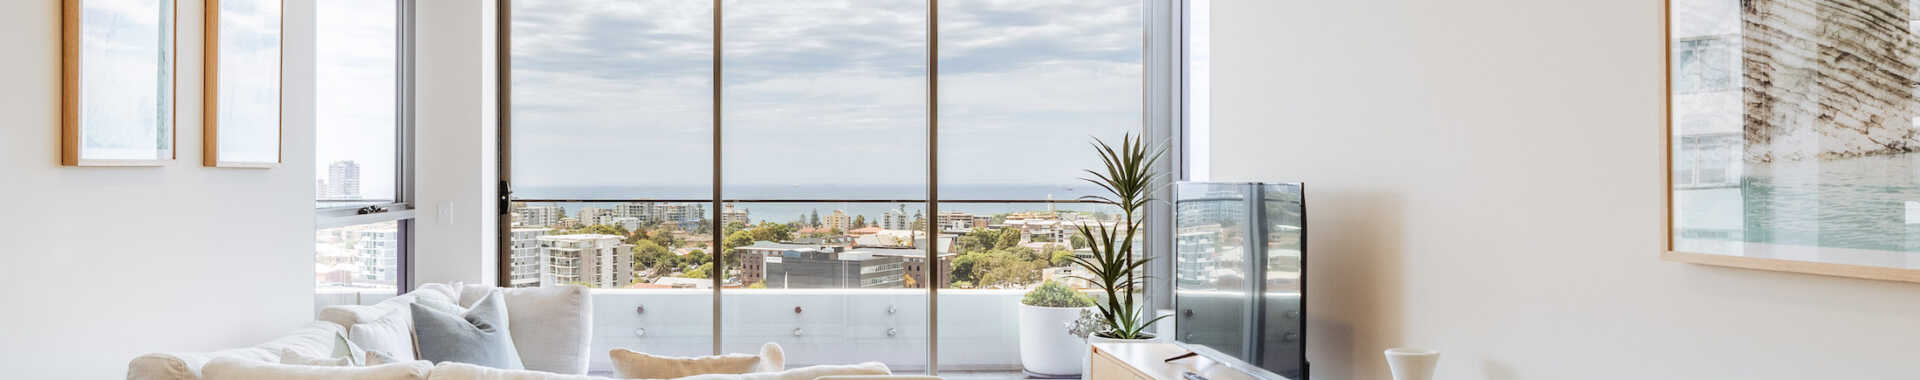 Astra Apartments, modern self contained accommodation Wollongong